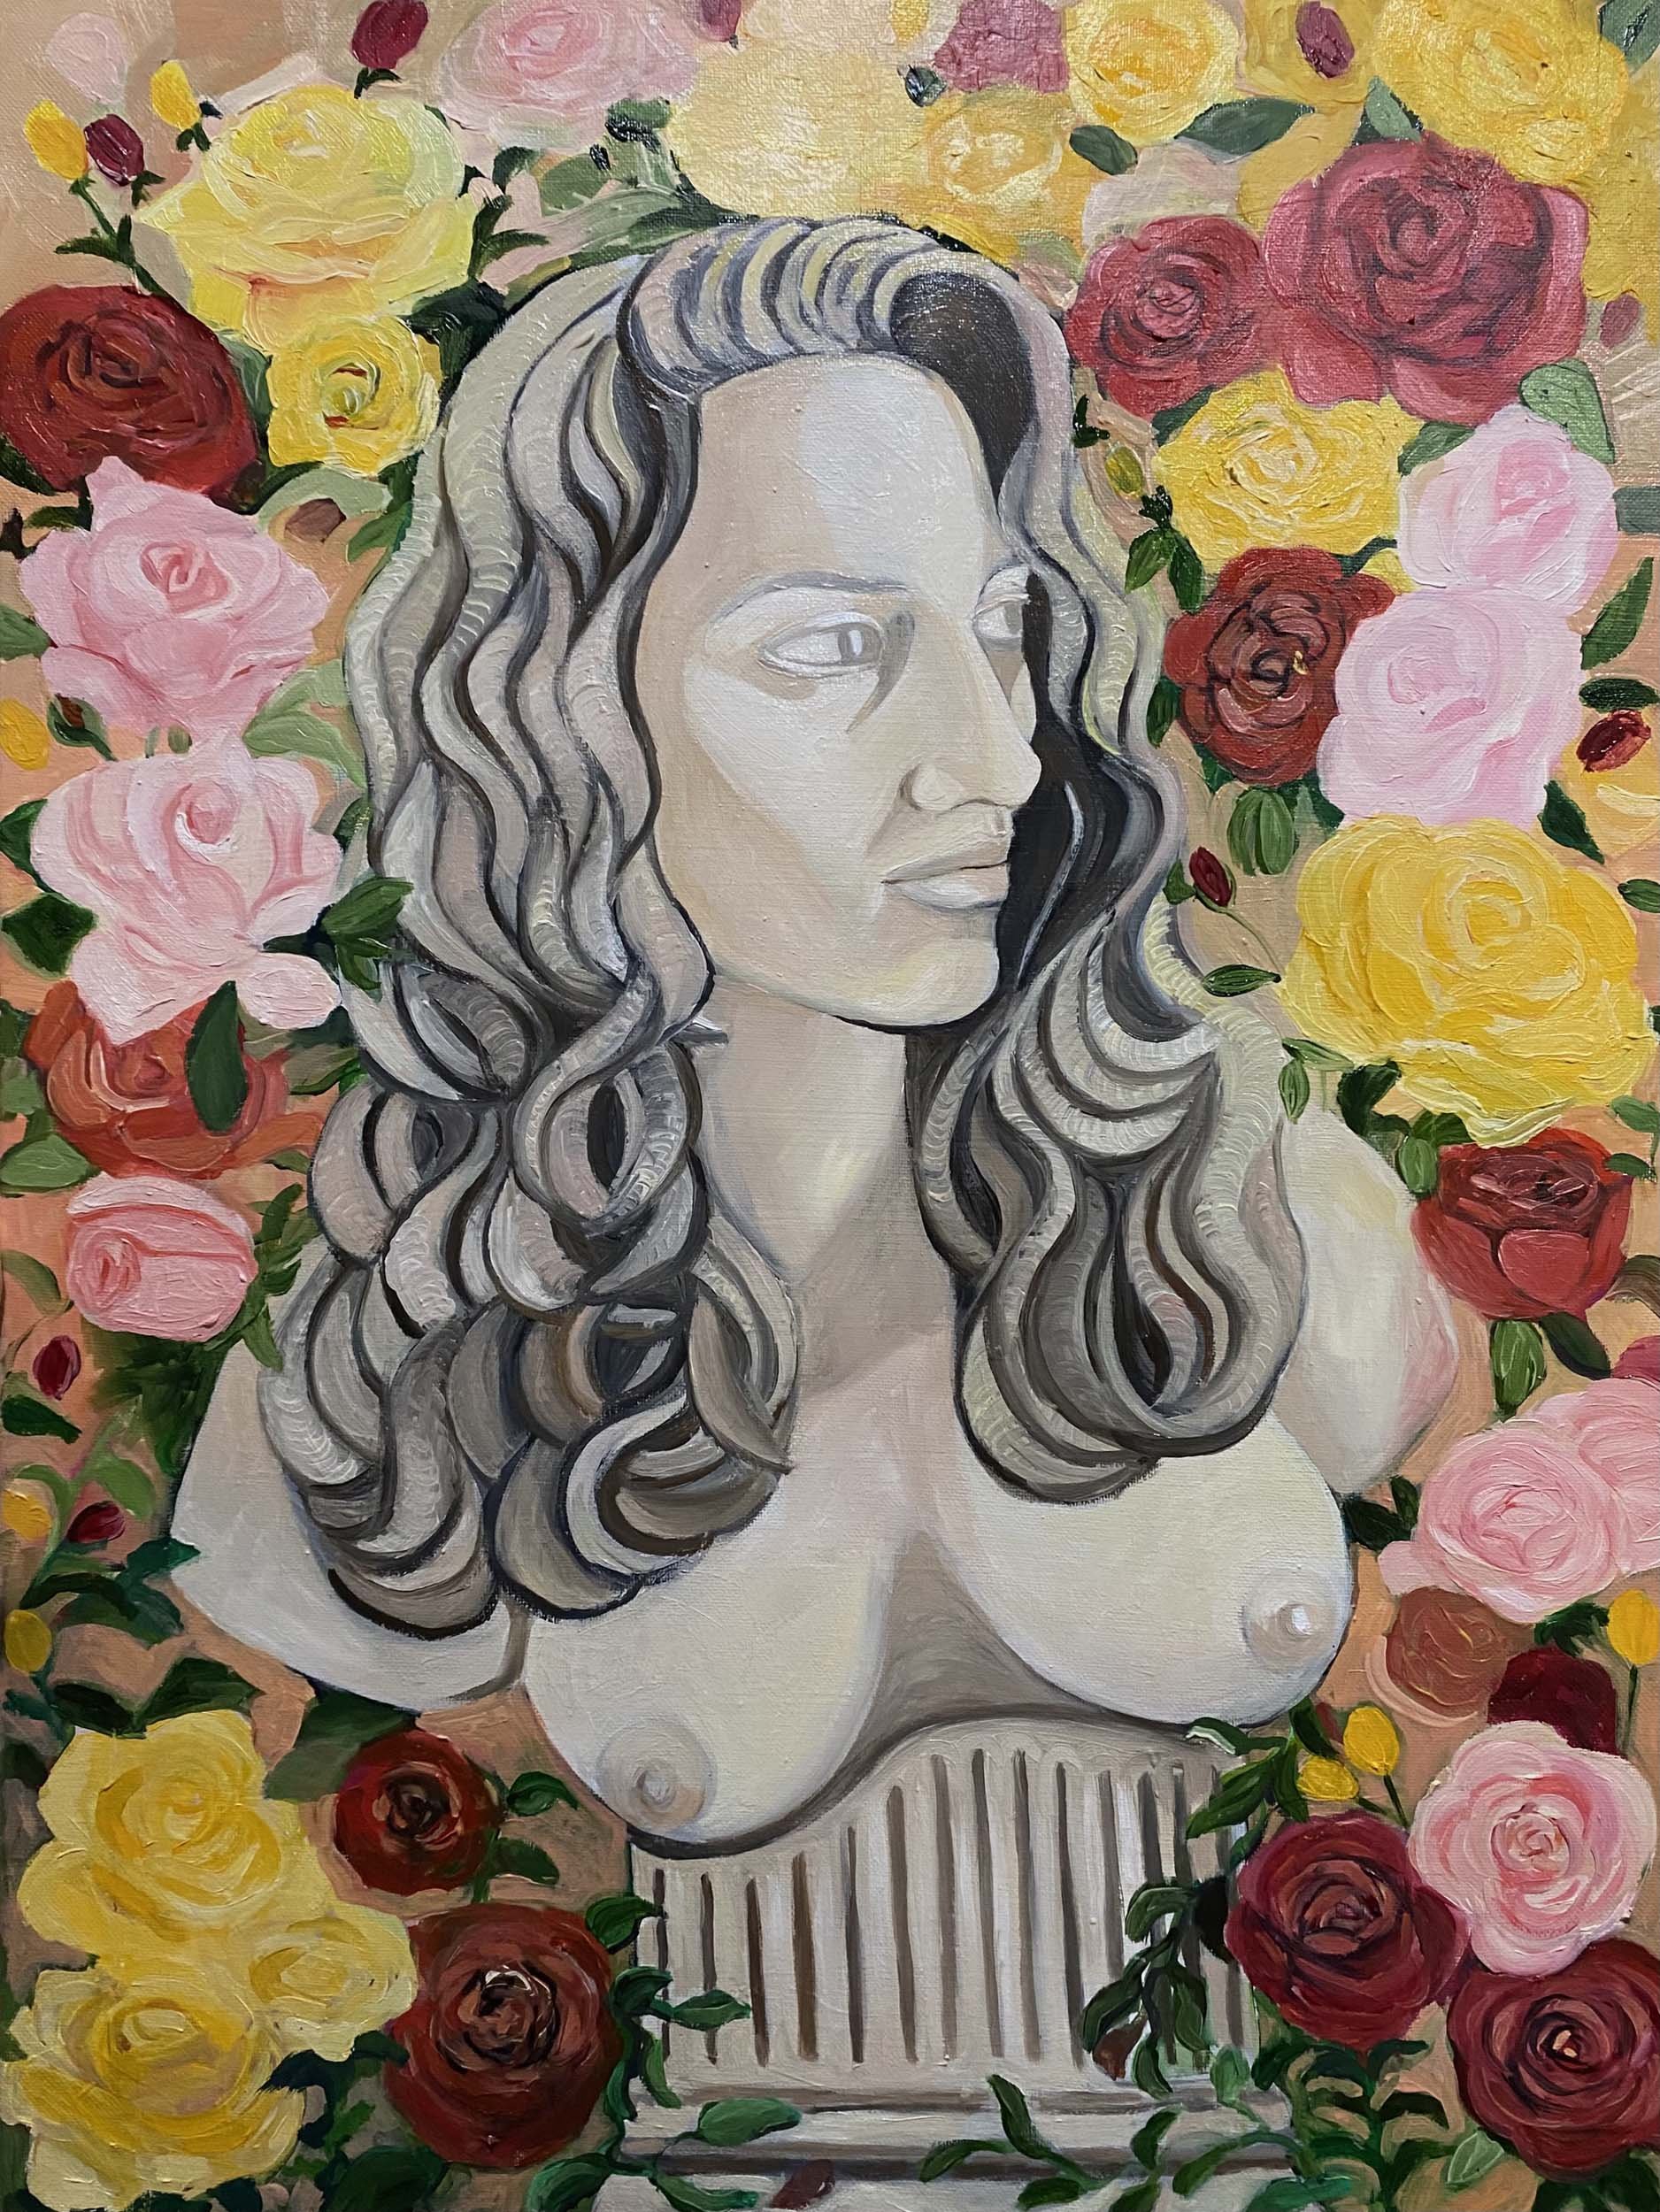 Michelle Bust, Oil on Canvas, 20” x 24”